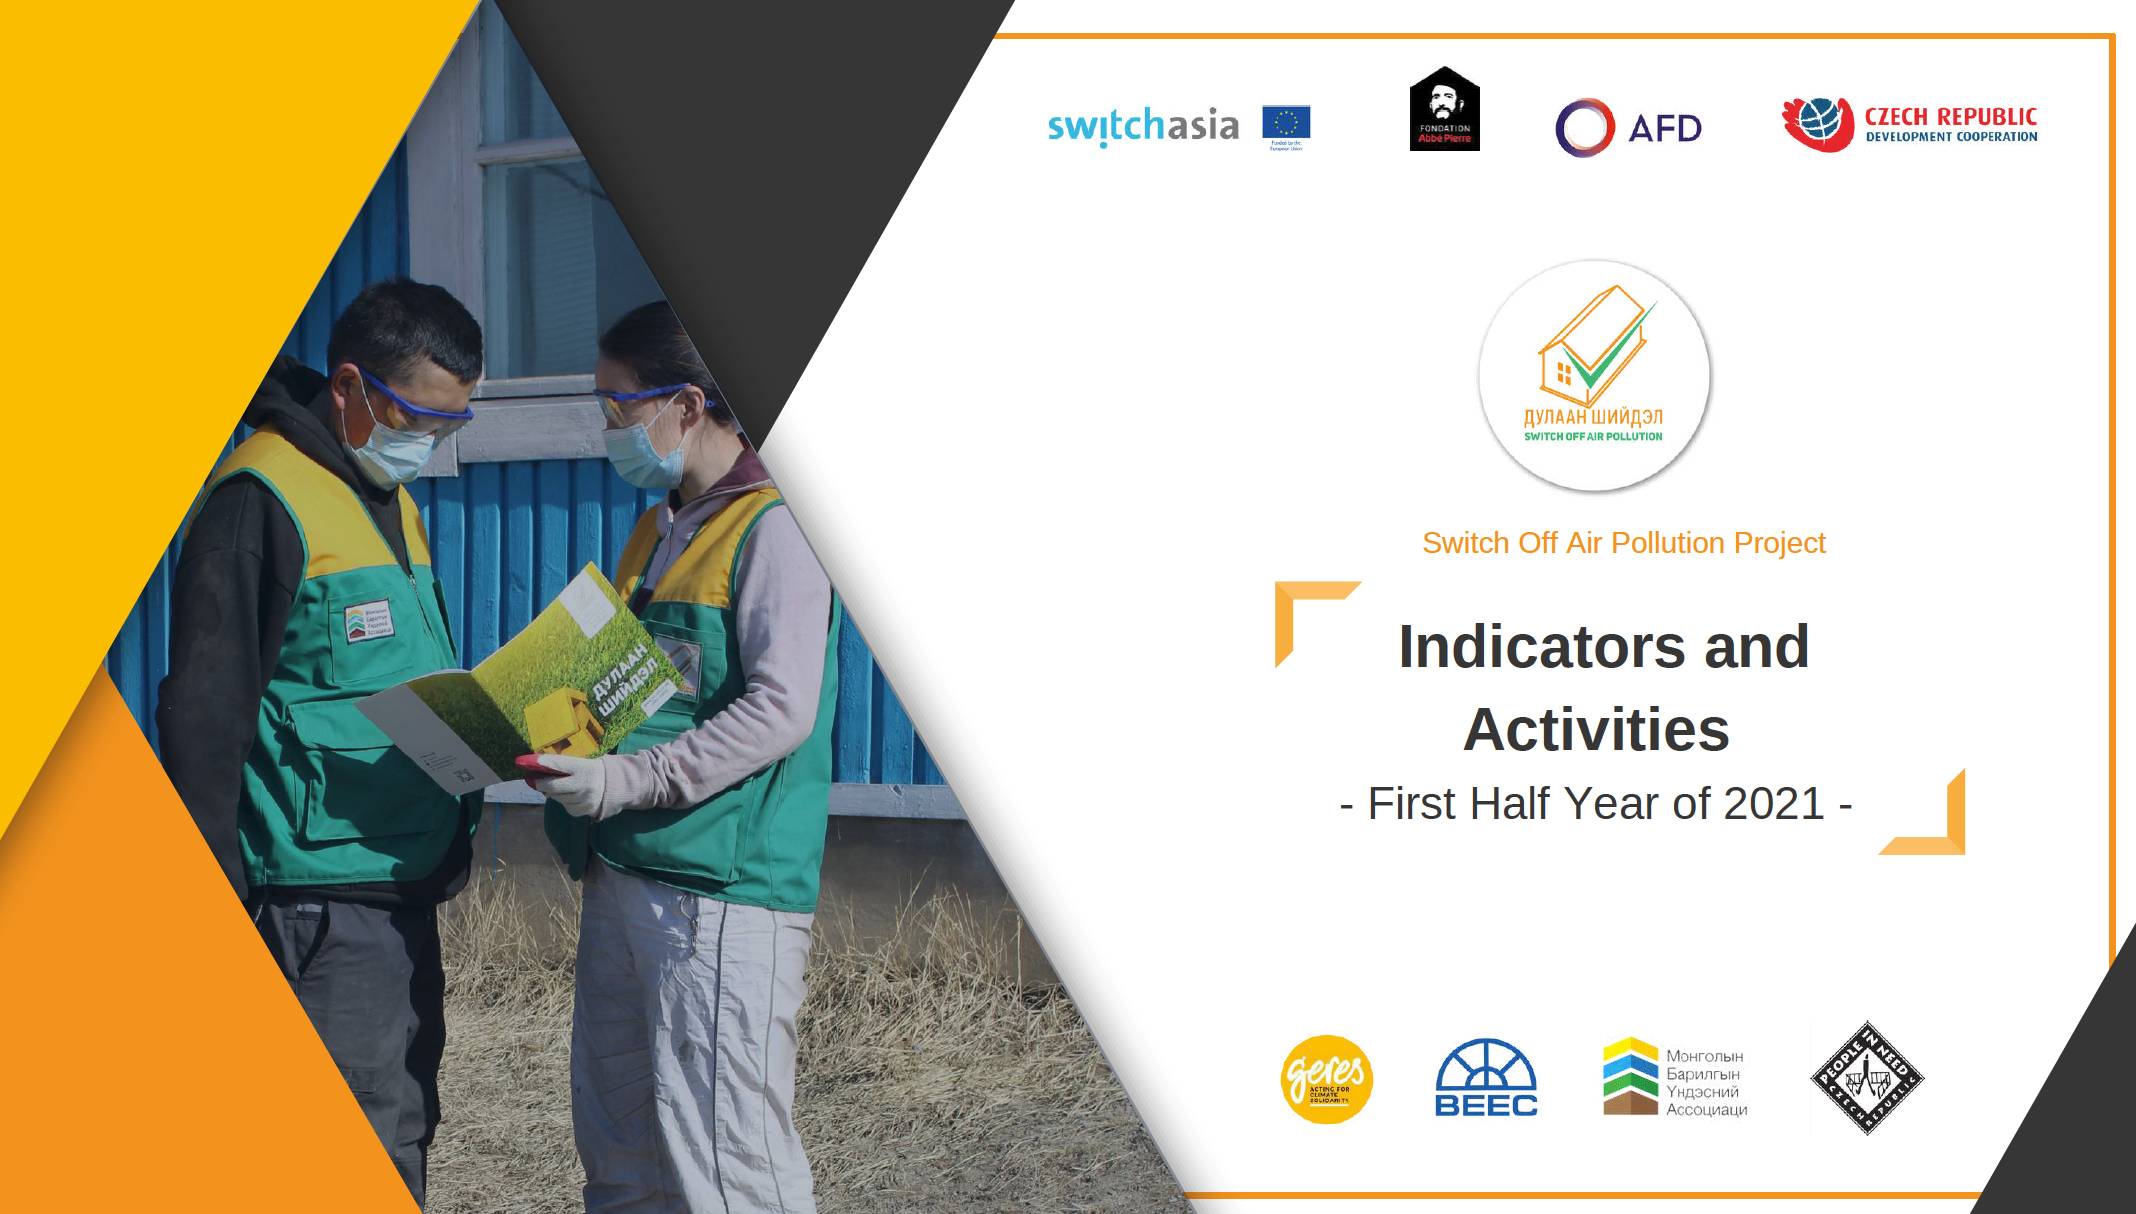 Project Indicators and Activities (First Half Year 2021)